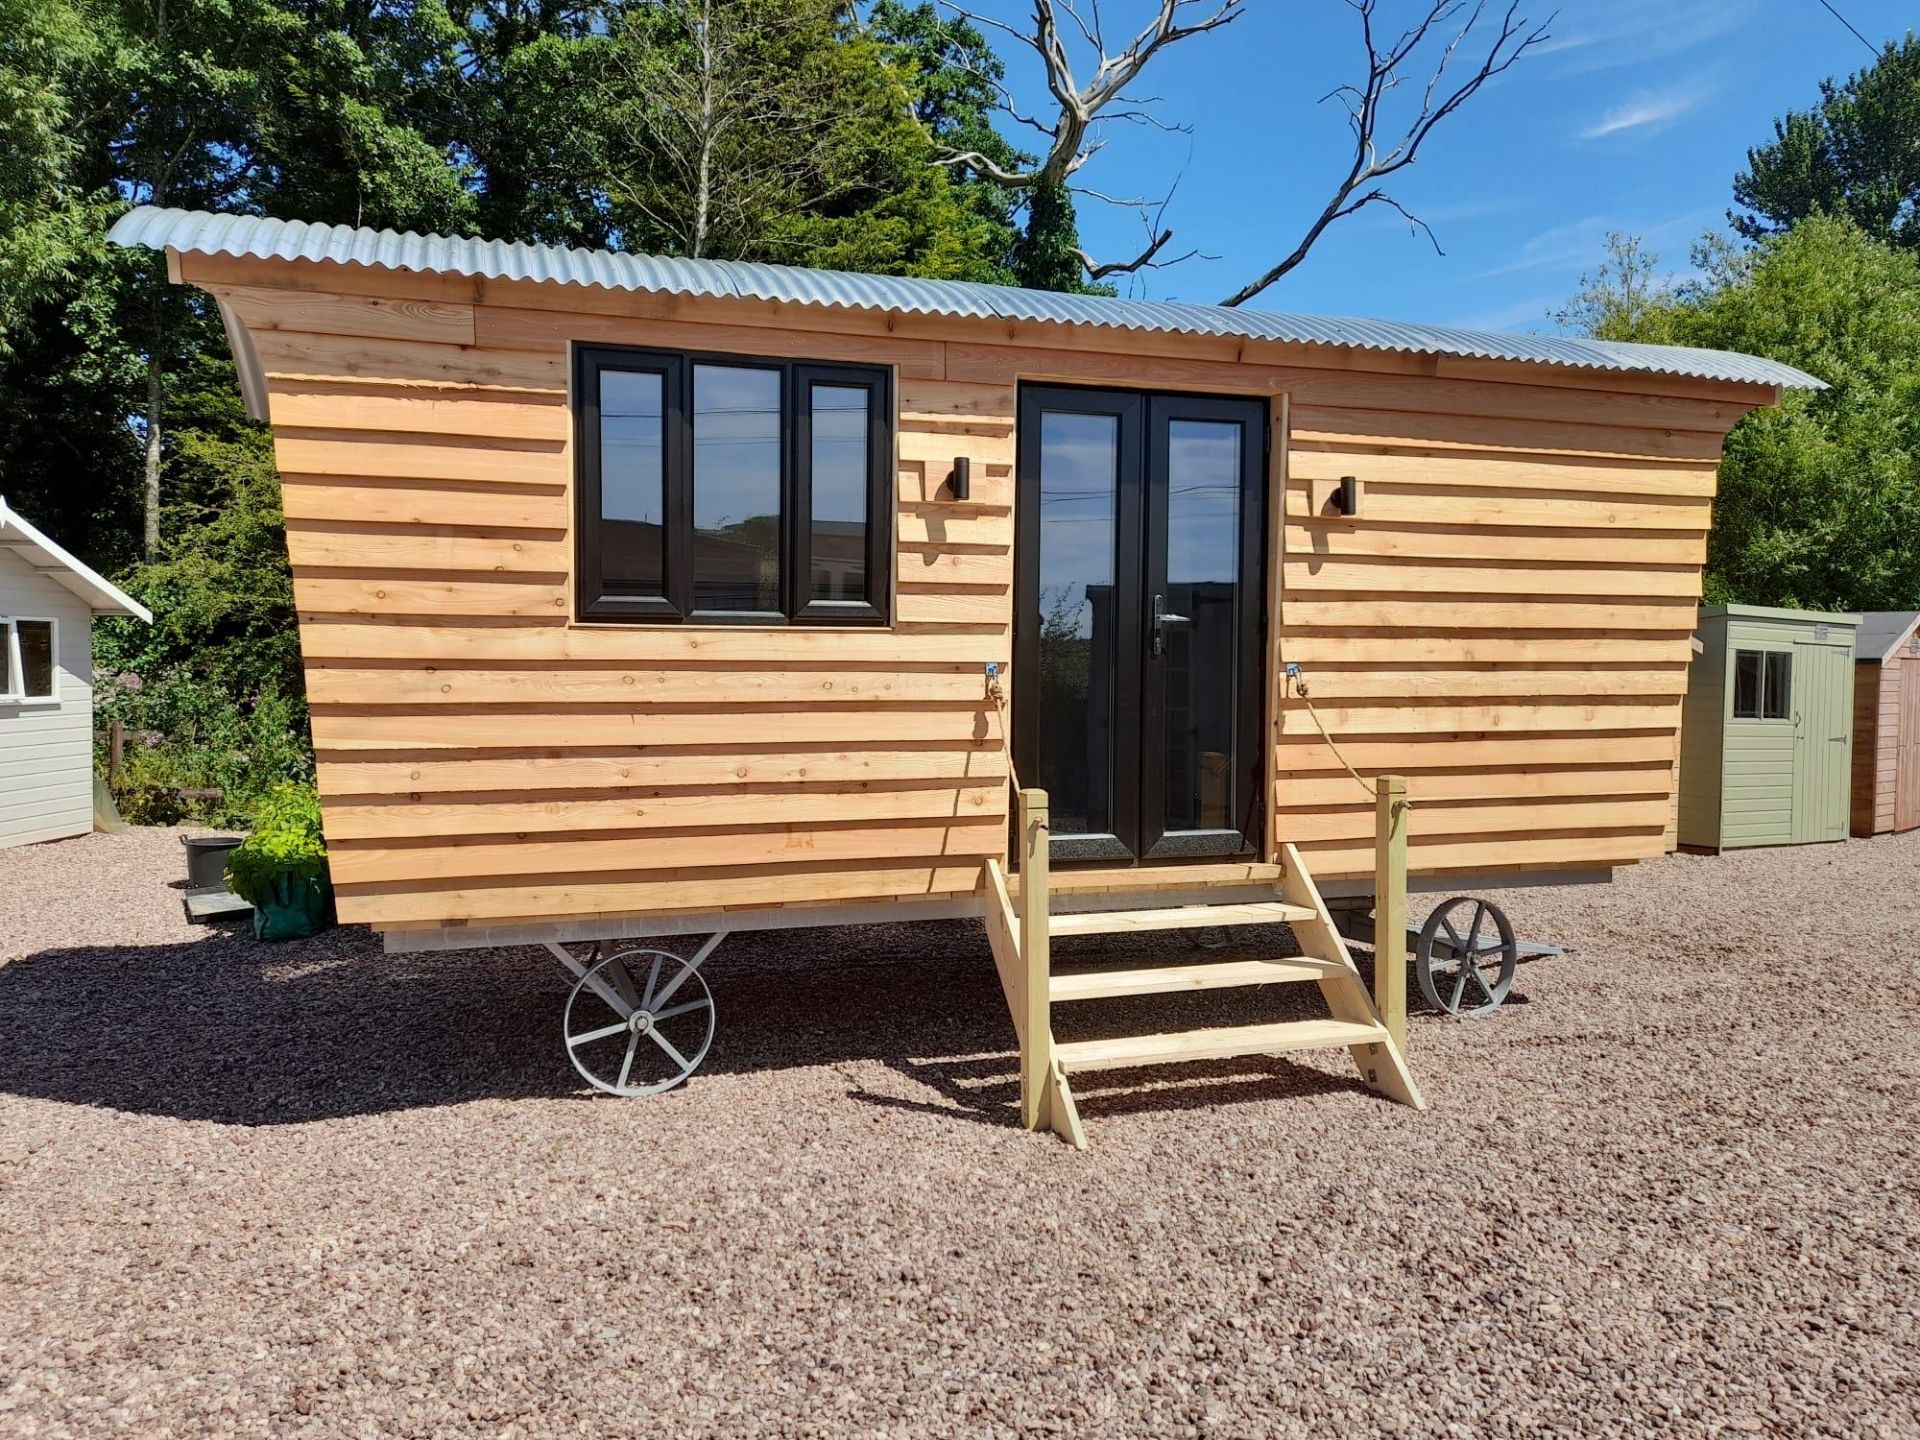 A SHEPHERDS HUT - LUXURIOUS NEW HAND CRAFTED, FULLY FINISHED BUILT FOR ALL YEAR ROUND USE HEAVILY